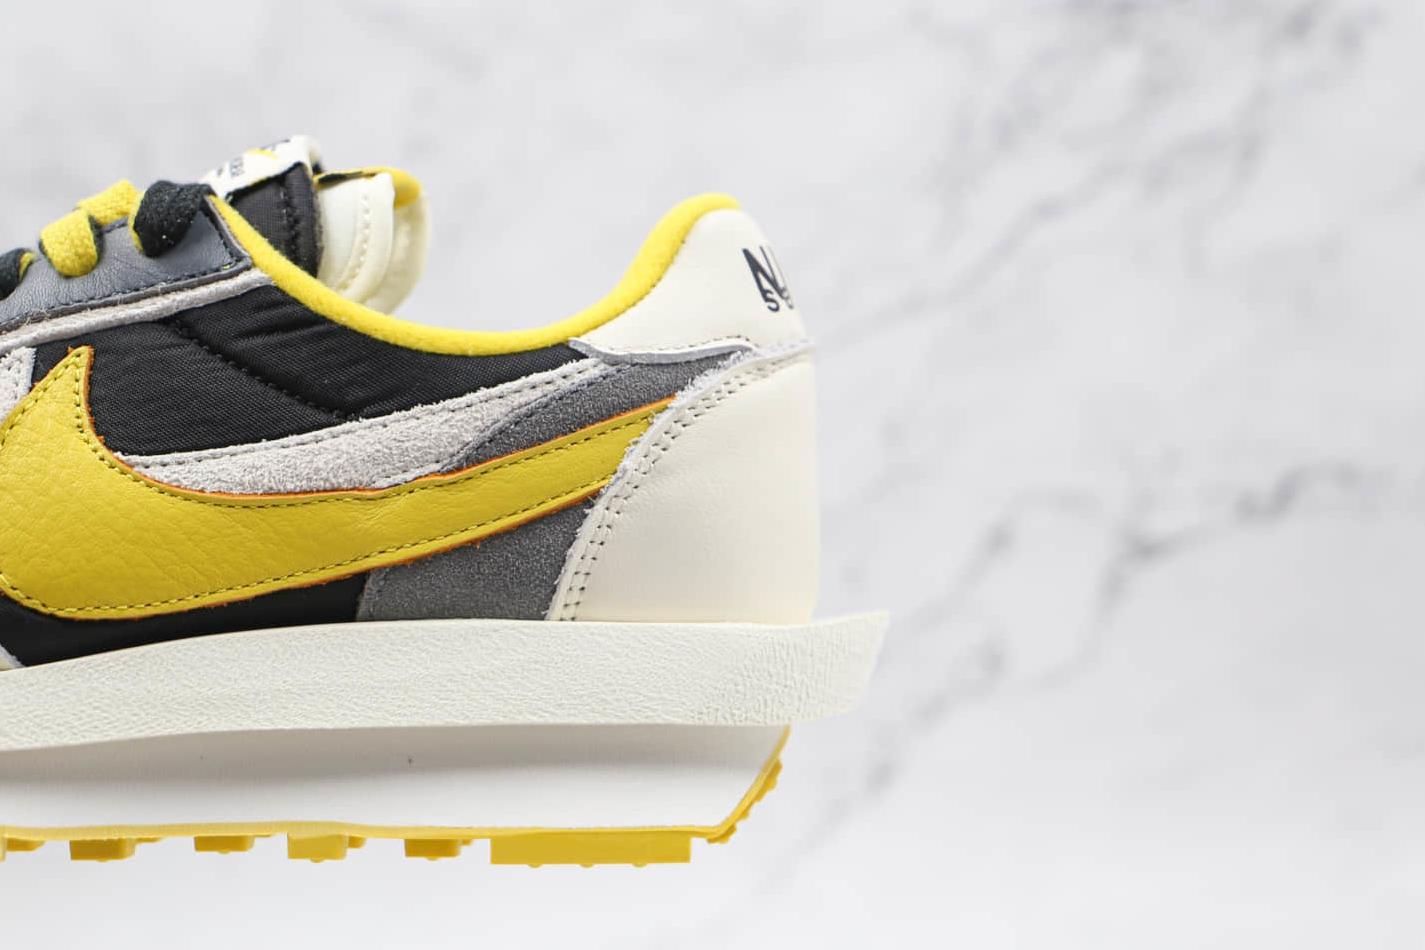 Nike sacai x Undercover x LDWaffle 'Bright Citron' DJ4877-001 - Limited Edition Sneakers Online | Shop Now!